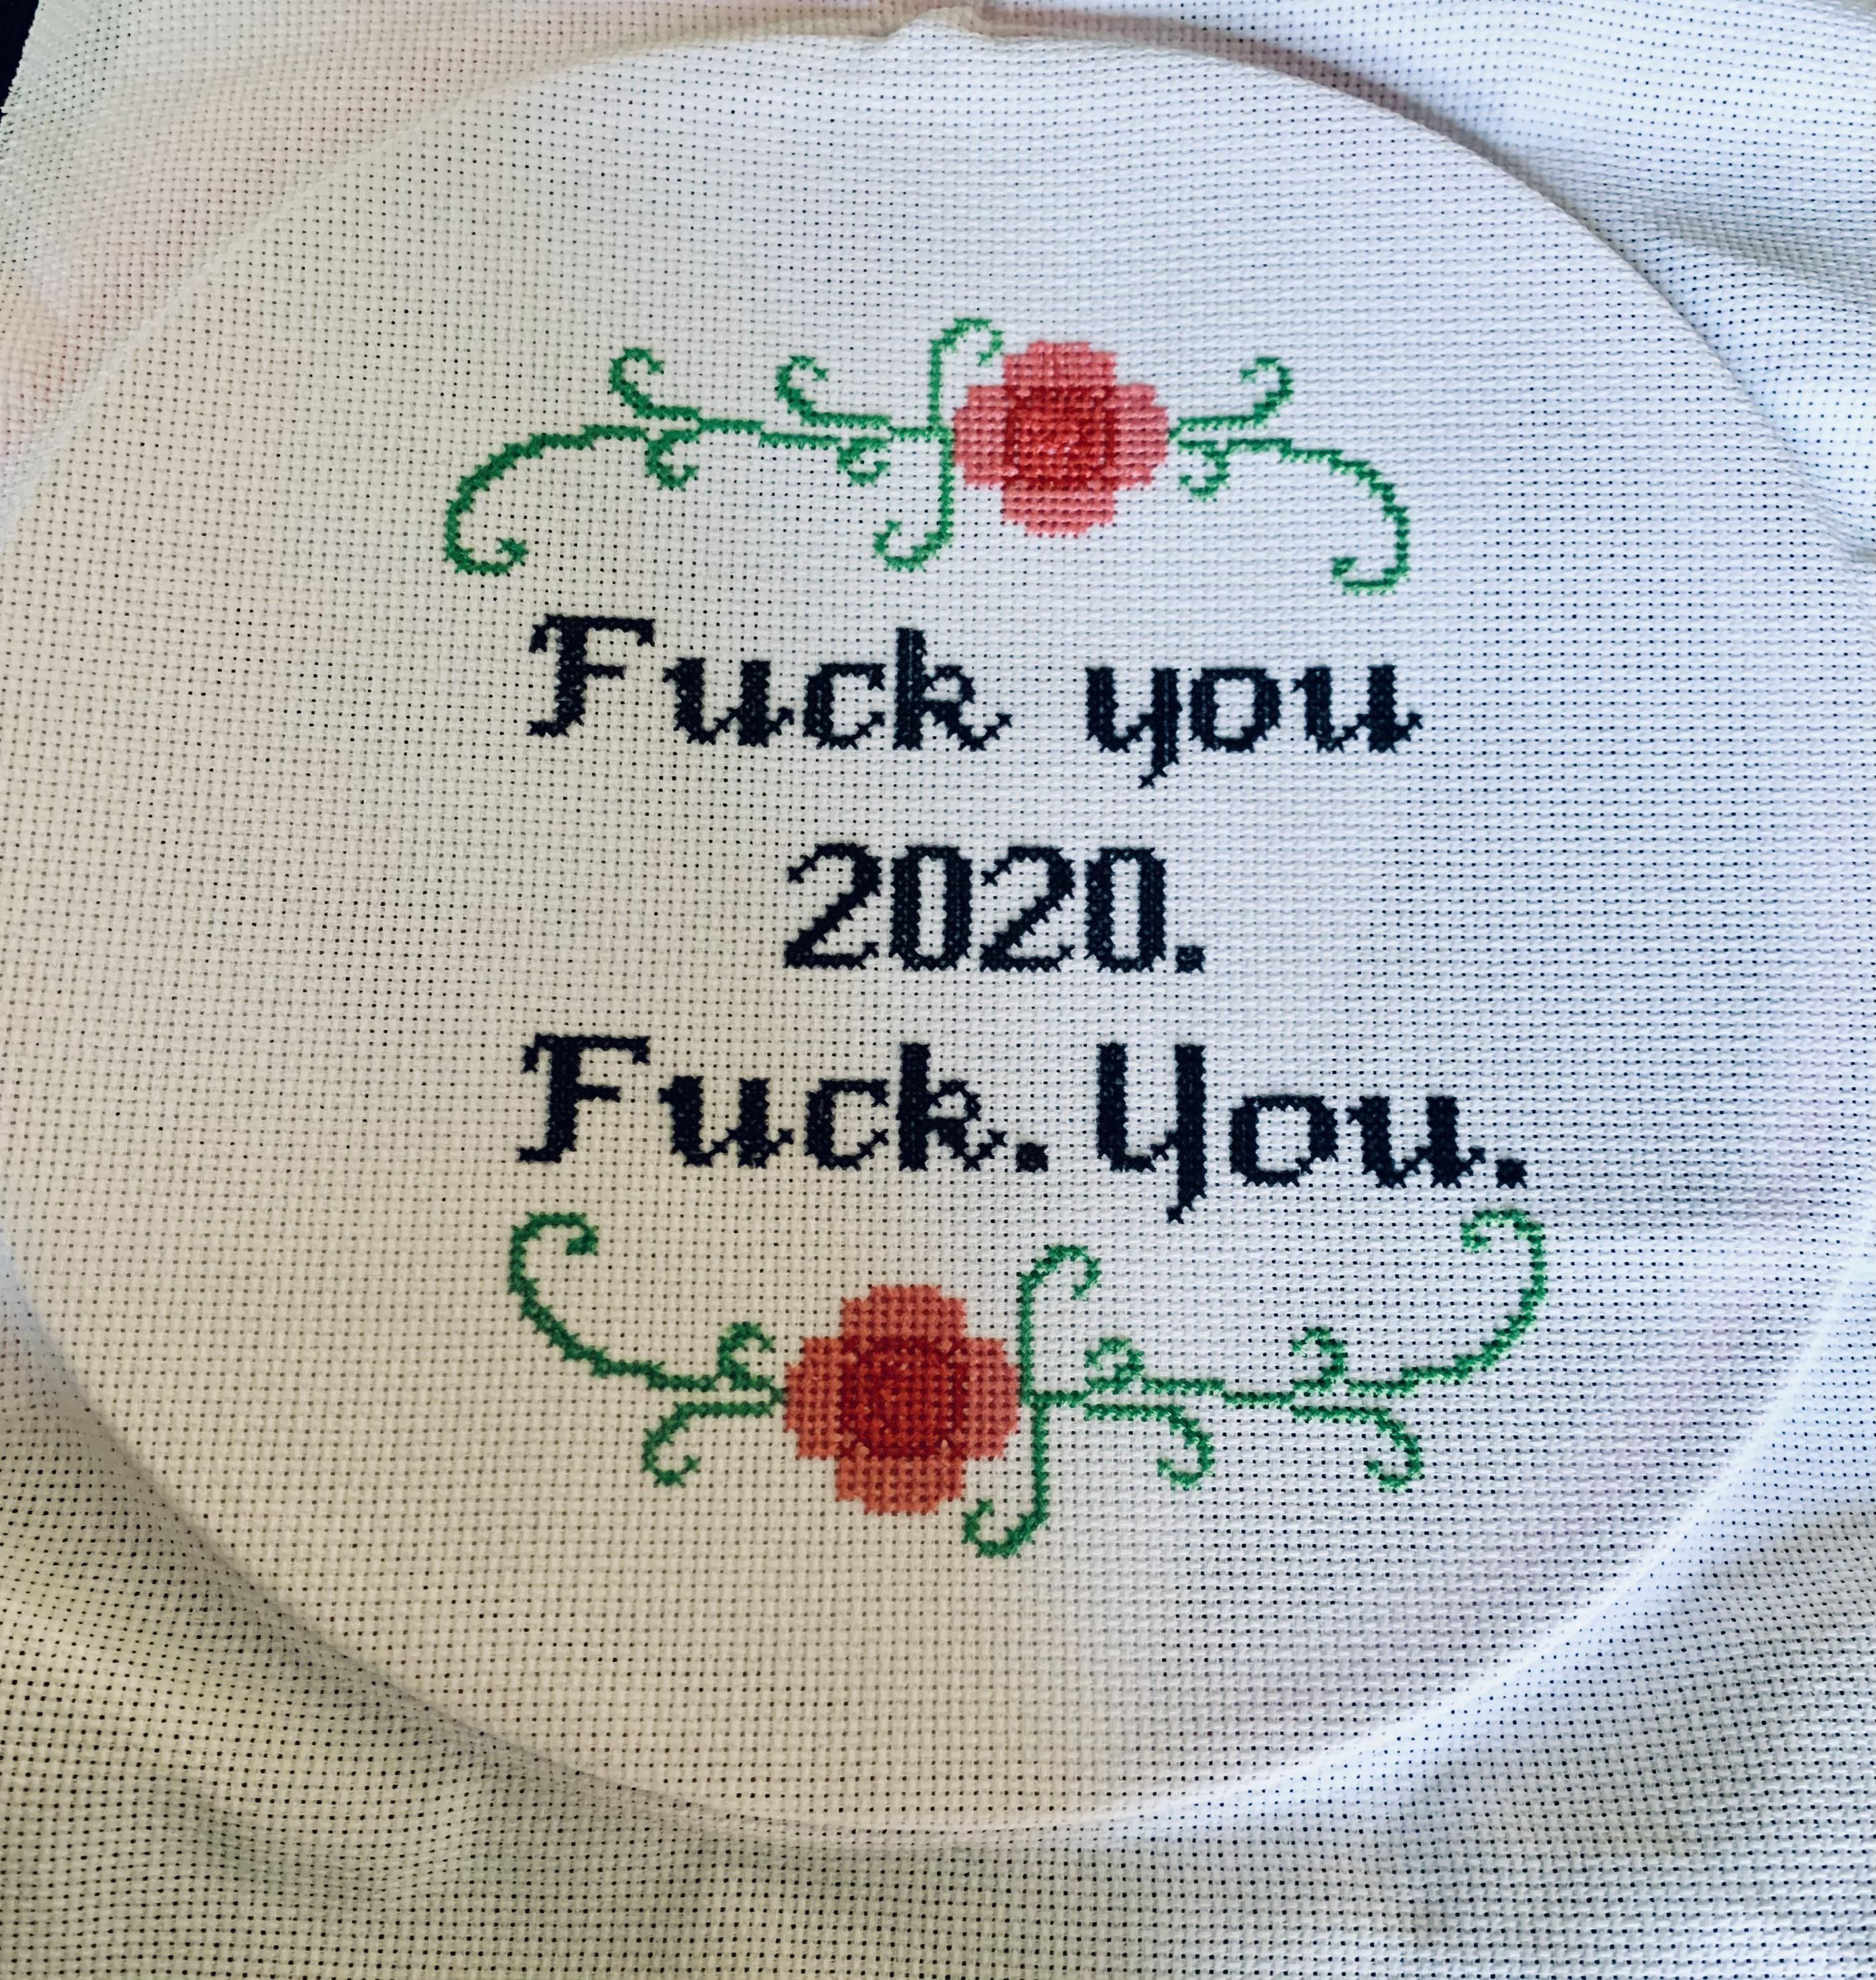 I have taught myself how to cross stitch during the pandemic...